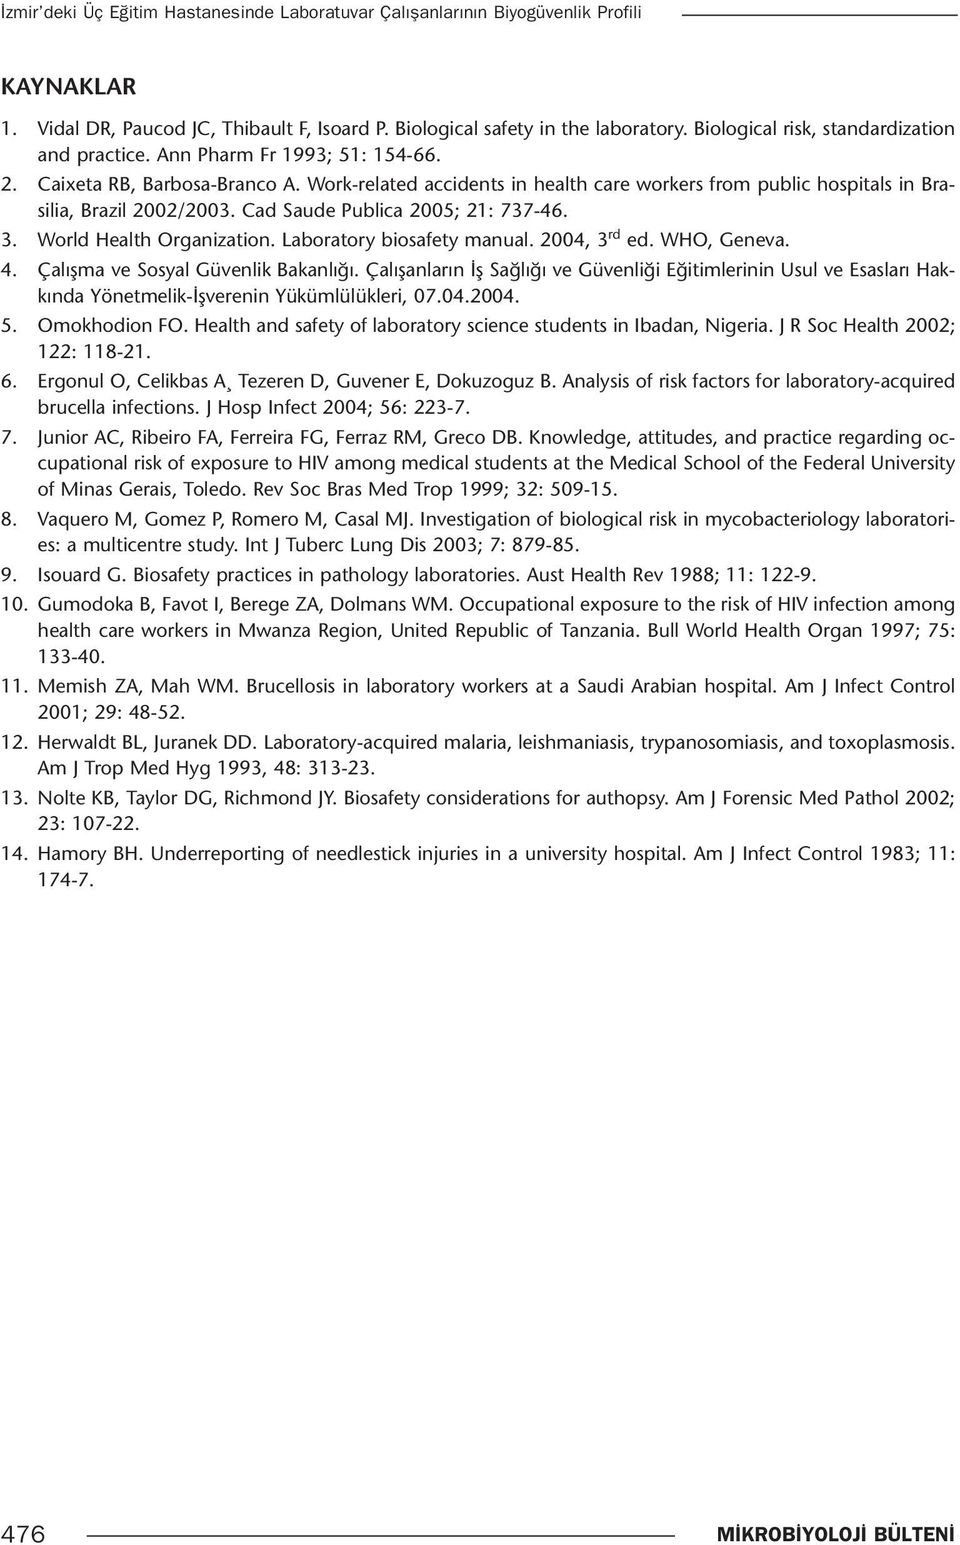 Work-related accidents in health care workers from public hospitals in Brasilia, Brazil 2002/2003. Cad Saude Publica 2005; 21: 737-46. 3. World Health Organization. Laboratory biosafety manual.